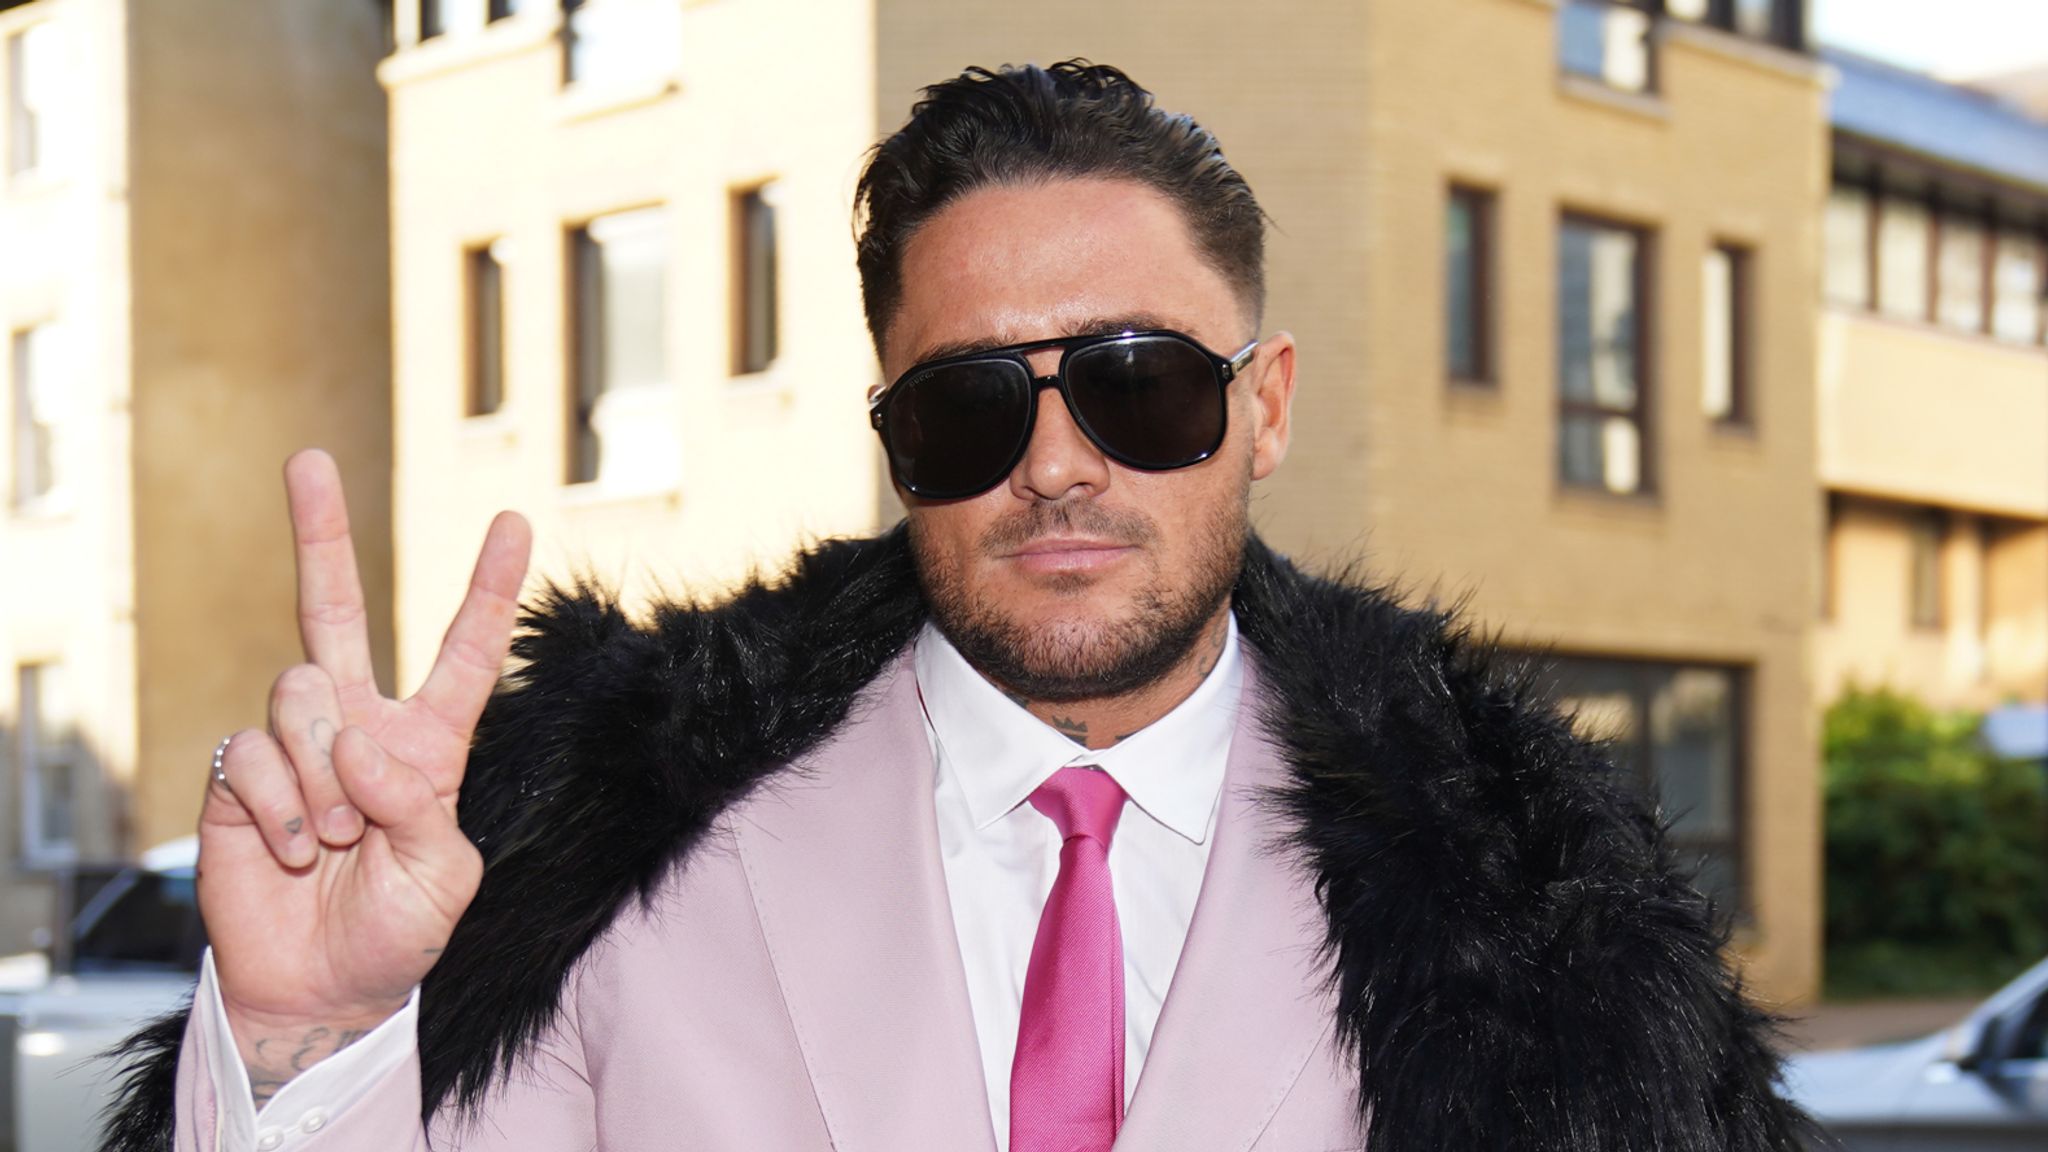 Stephen Bear Reality TV star on trial accused of sharing garden sex tape on OnlyFans Ents and Arts News Sky News image